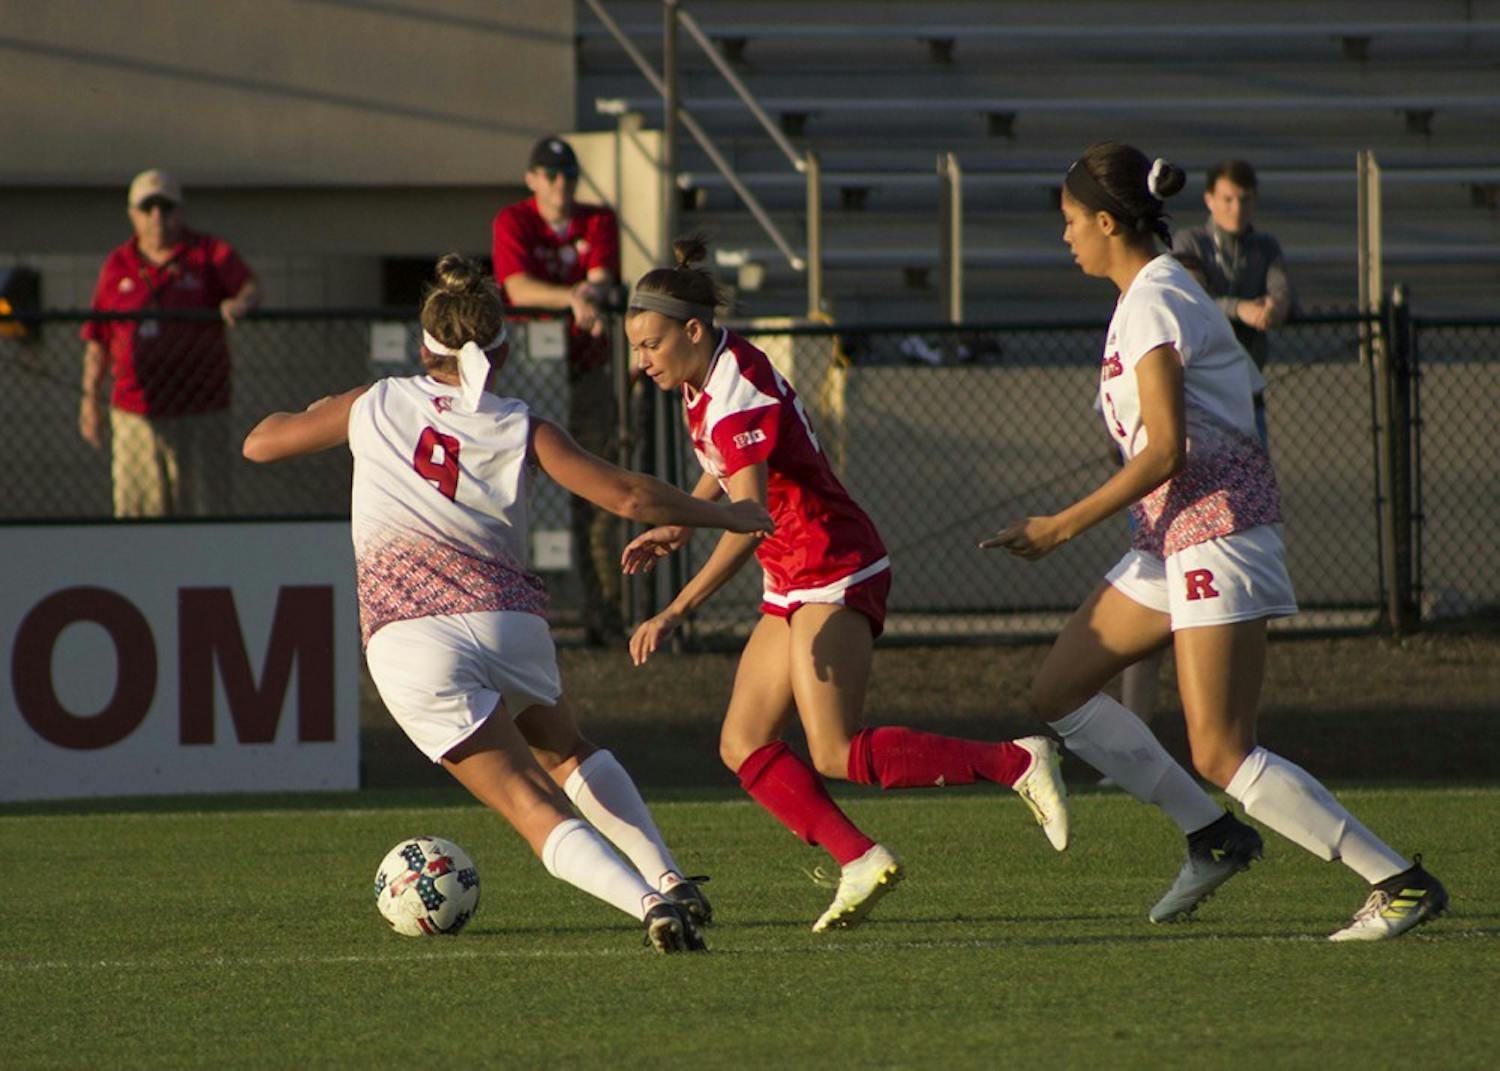 Sophomore midfielder Sydney Kilgore controls the ball under pressure from two defenders against Rutgers Saturday night. IU lost 1-0 in overtime to Rutgers at Bill Armstrong Stadium.